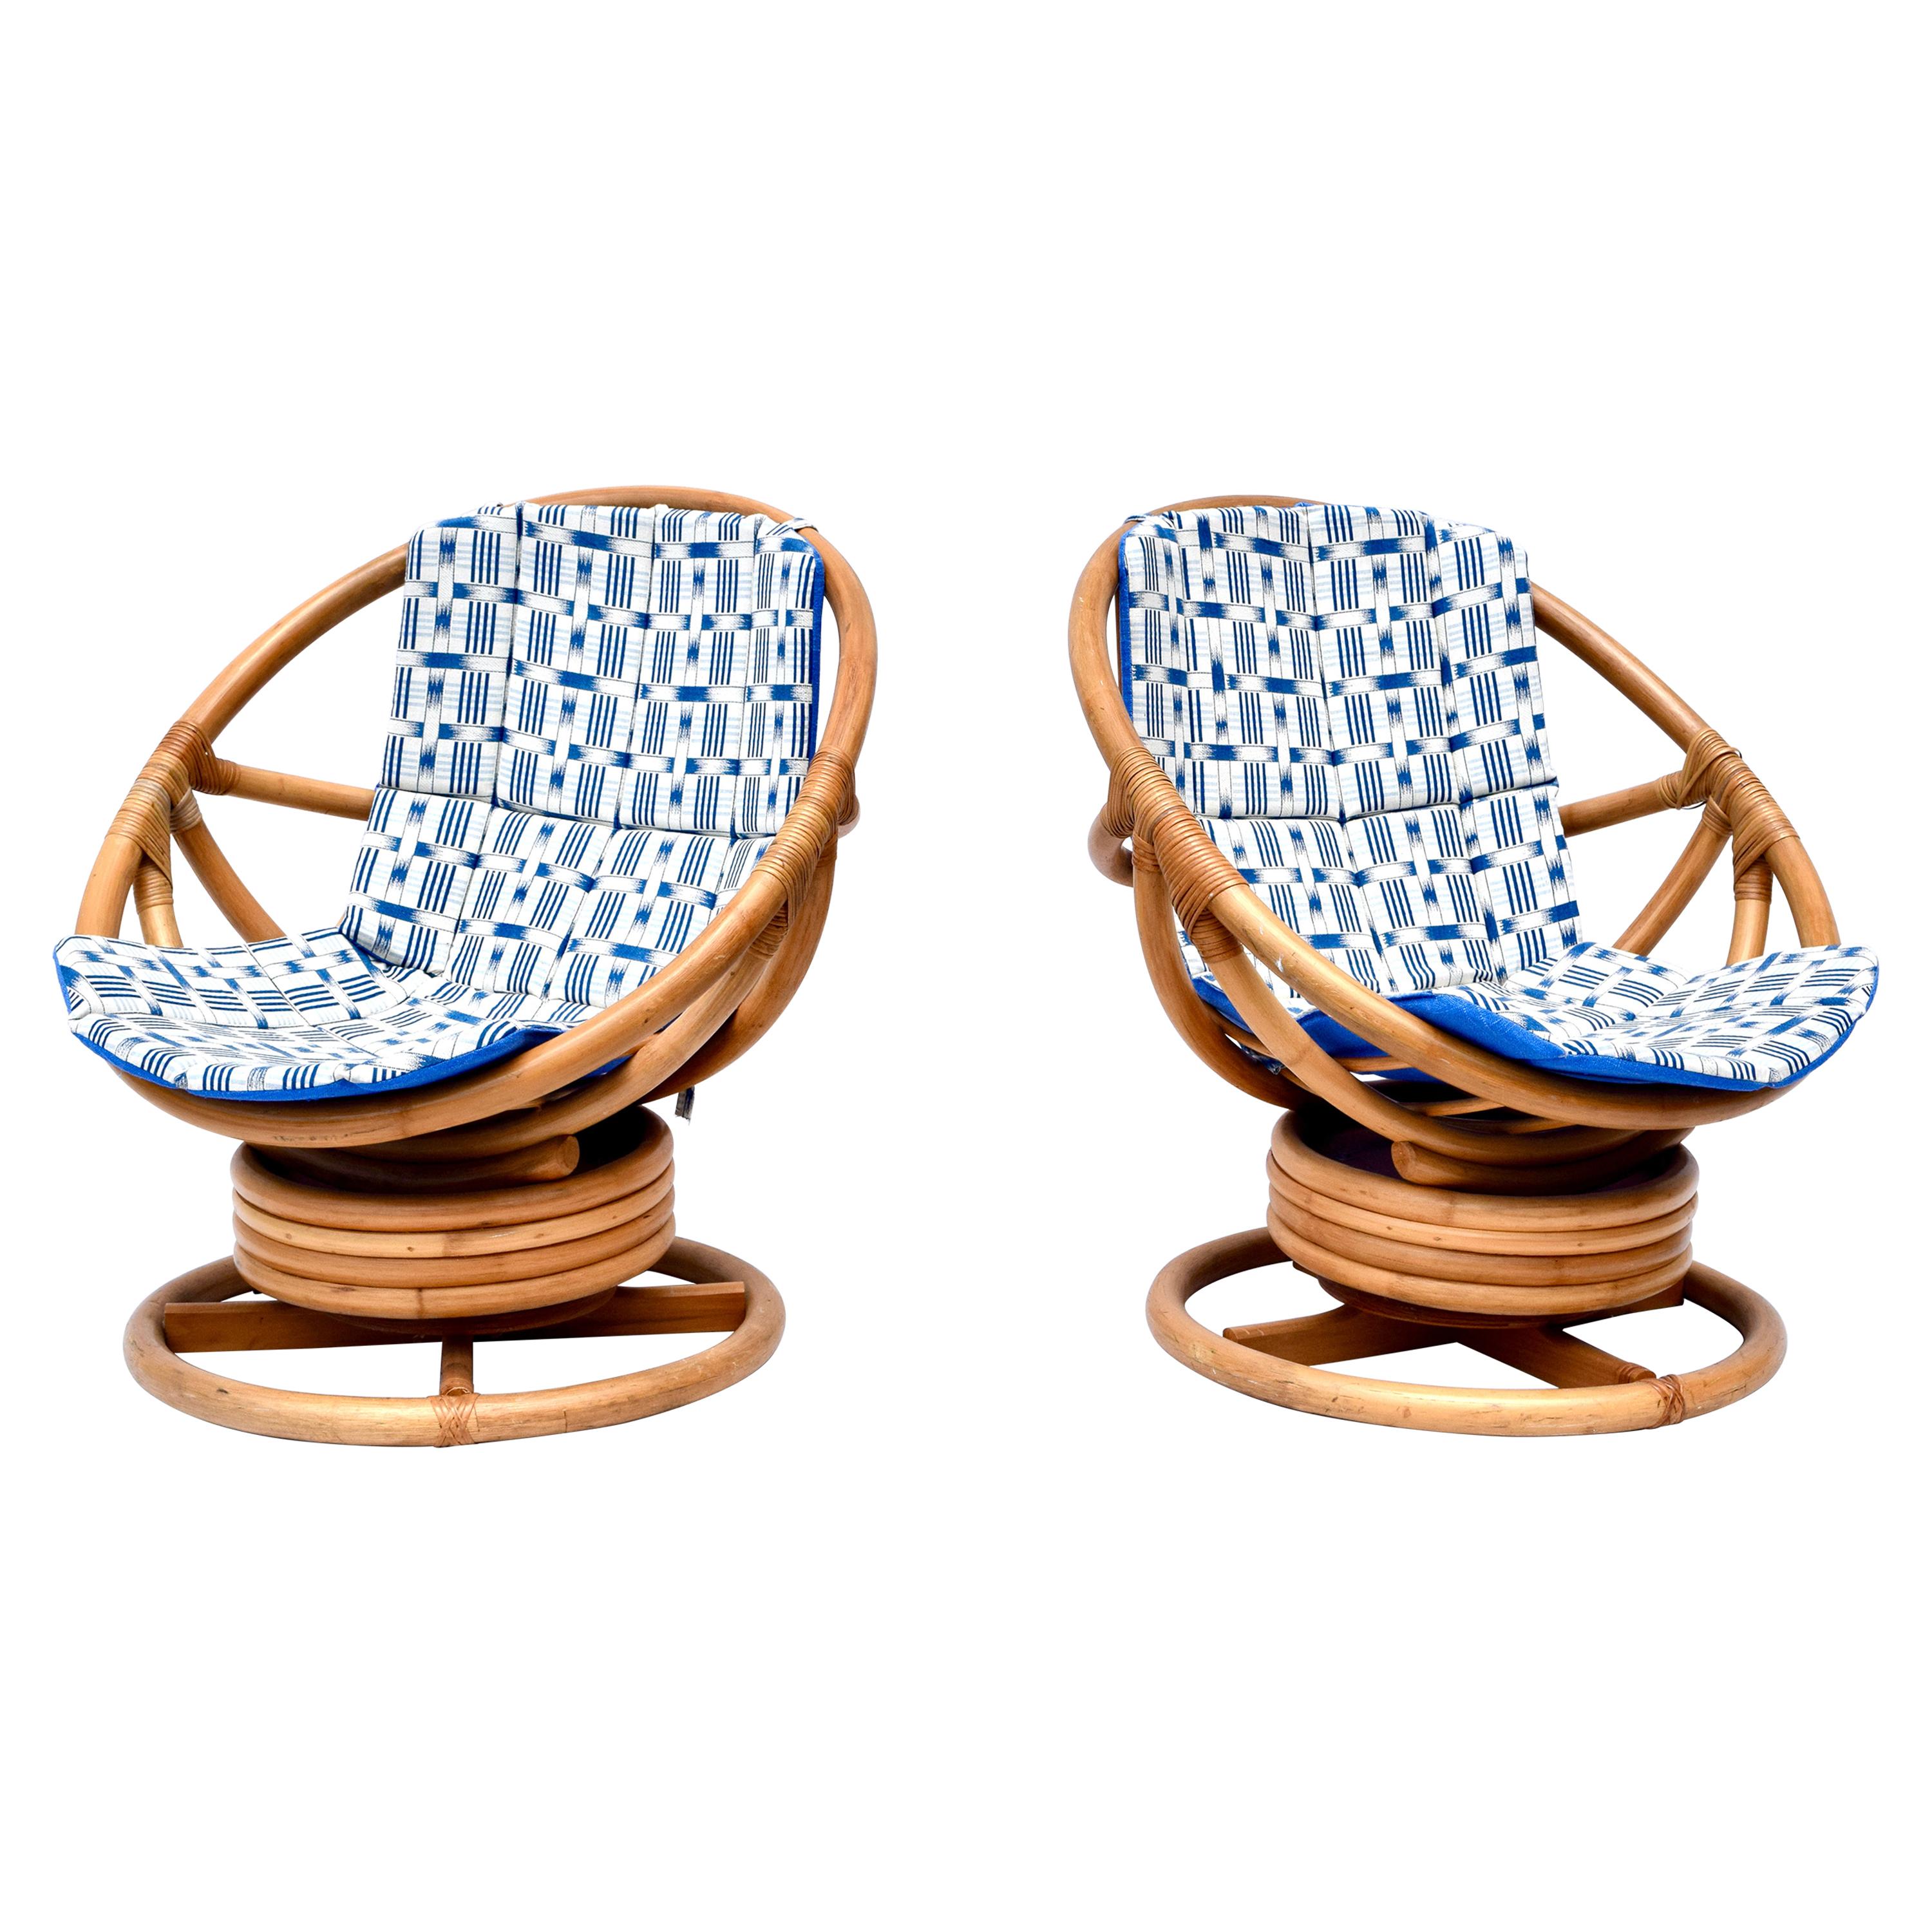 Pair of Saucer Form Swivel Lounge Bamboo Rattan Chairs, circa 1970s at  1stDibs | bamboo saucer chair, cane saucer chair, saucer rocking chair